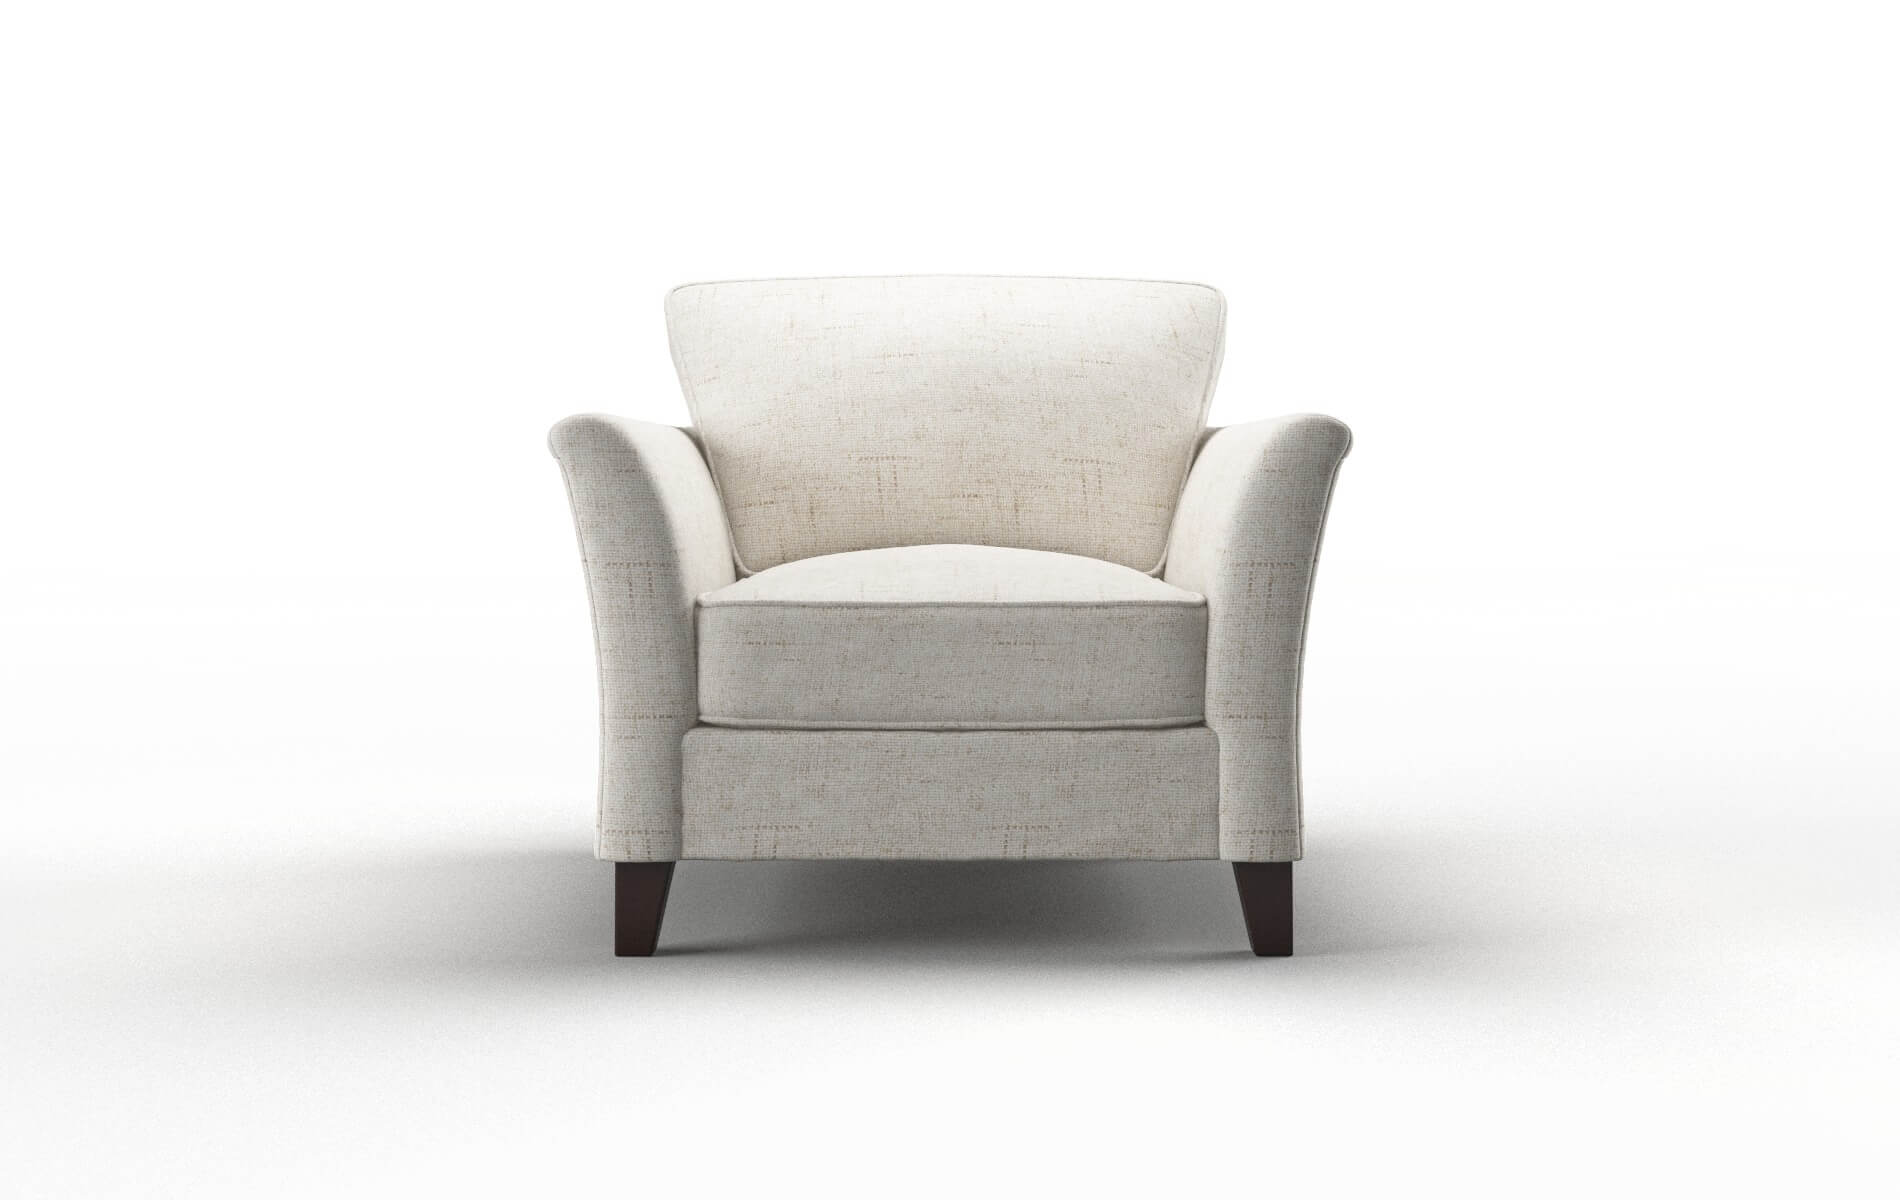 Cologne Oceanside Natural chair espresso legs